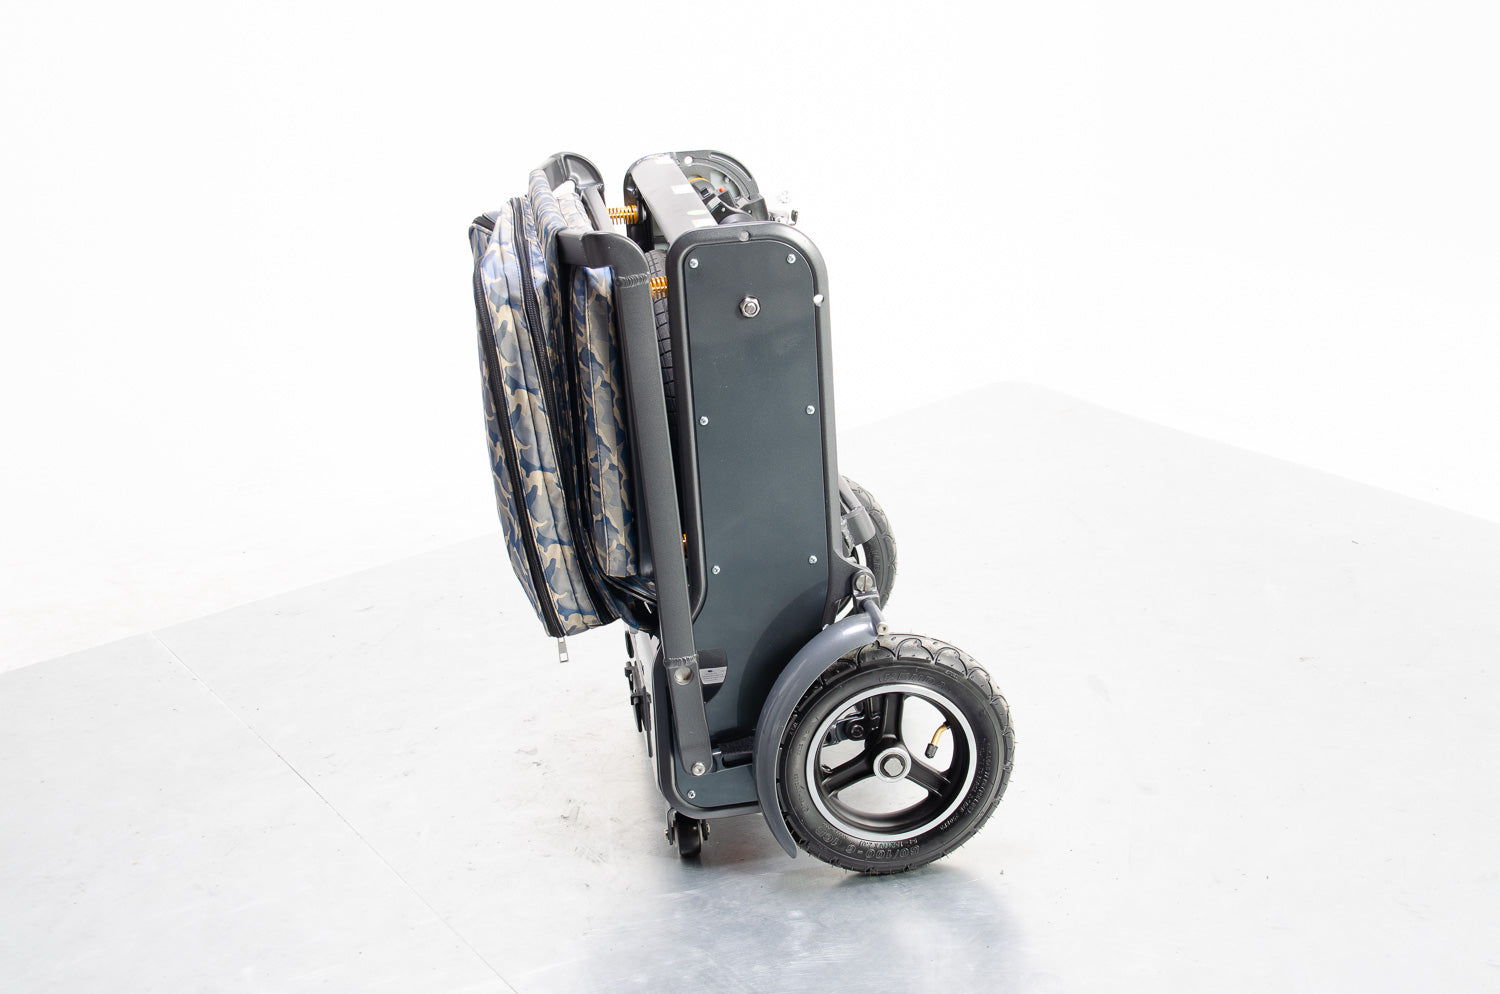 lightweight foldable mobility scooter uk